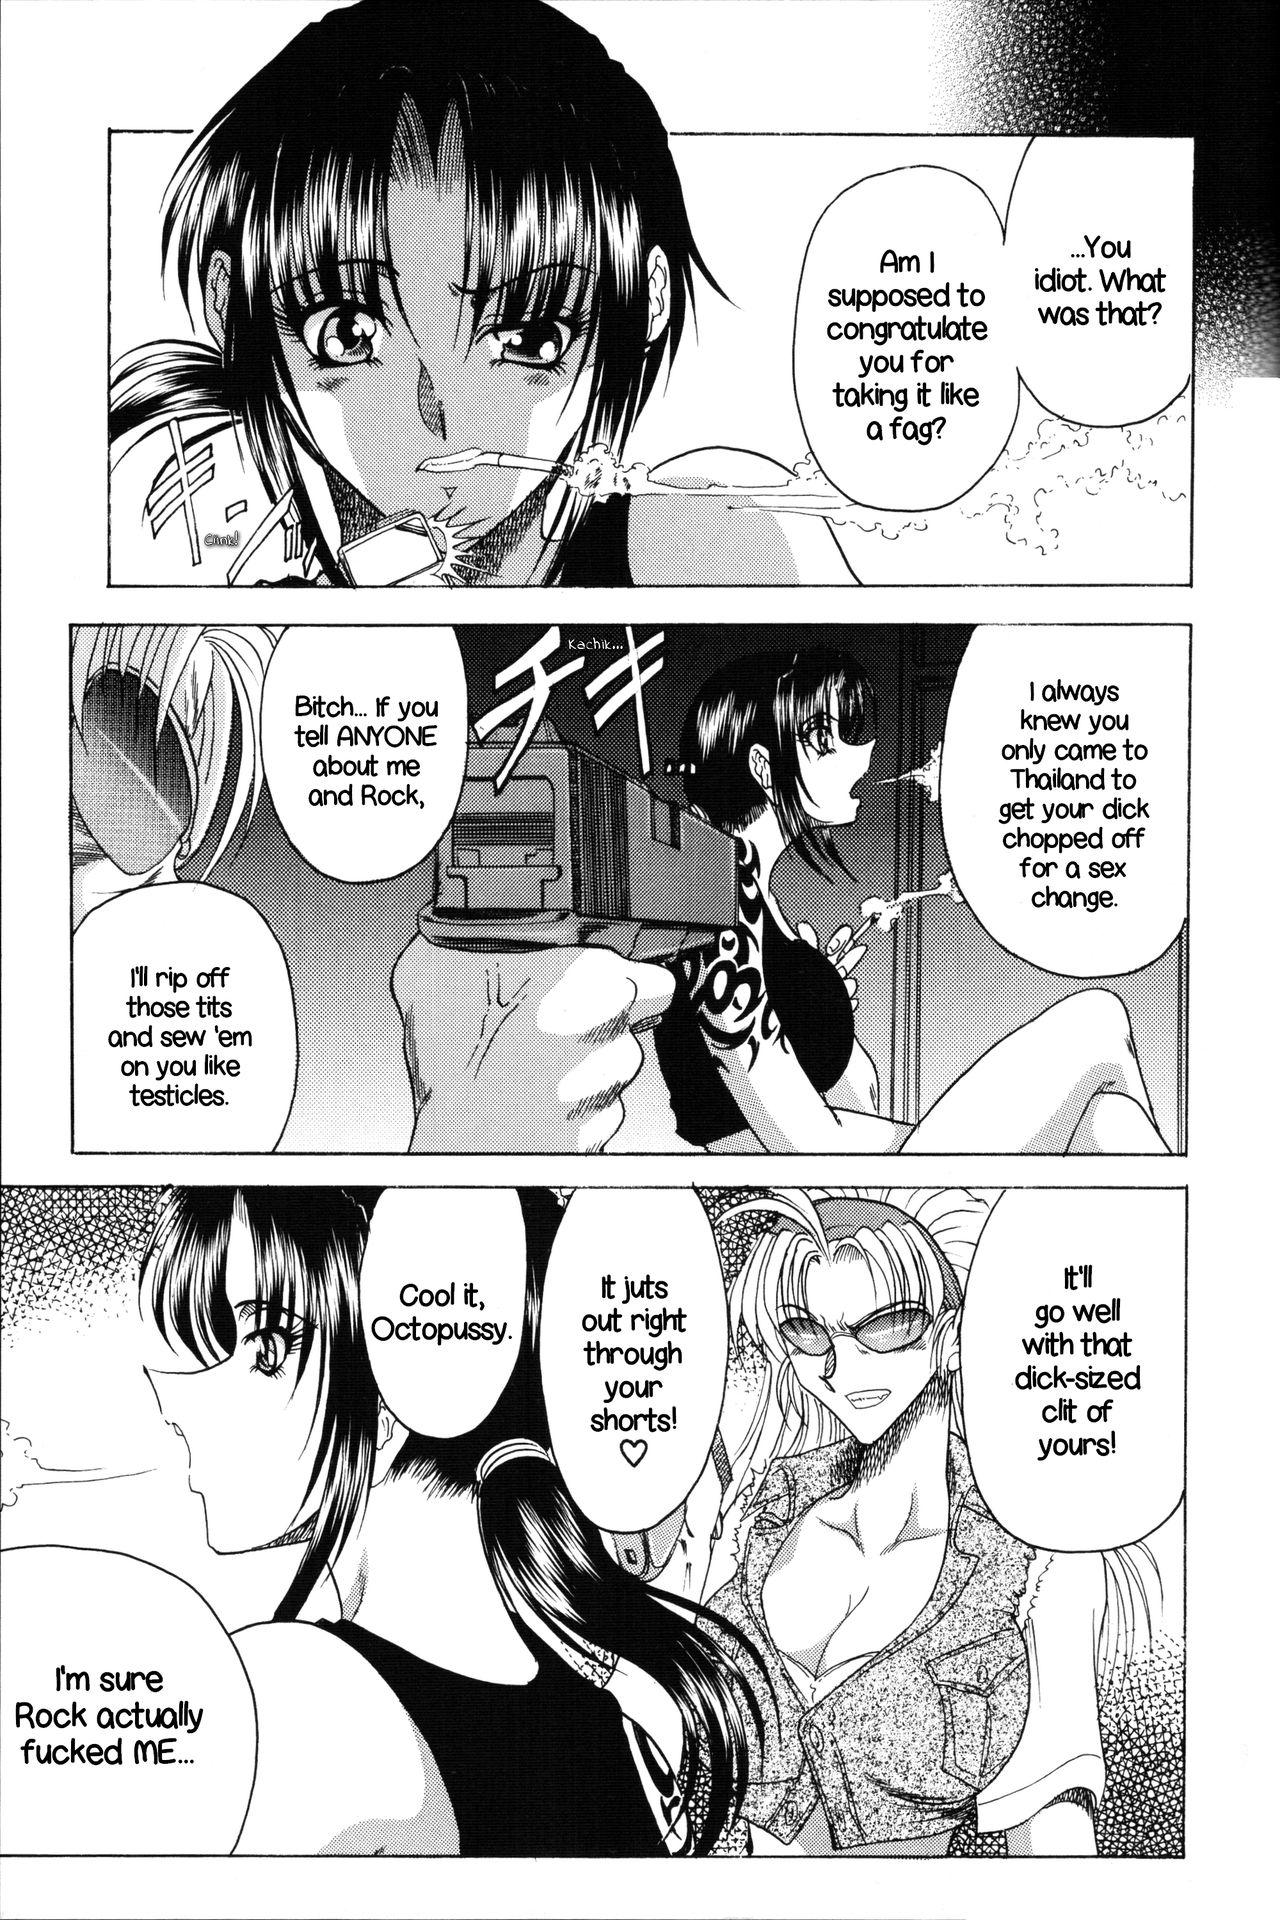 Booty ZONE 35 Get drunk on rook - Black lagoon Assfucked - Page 14